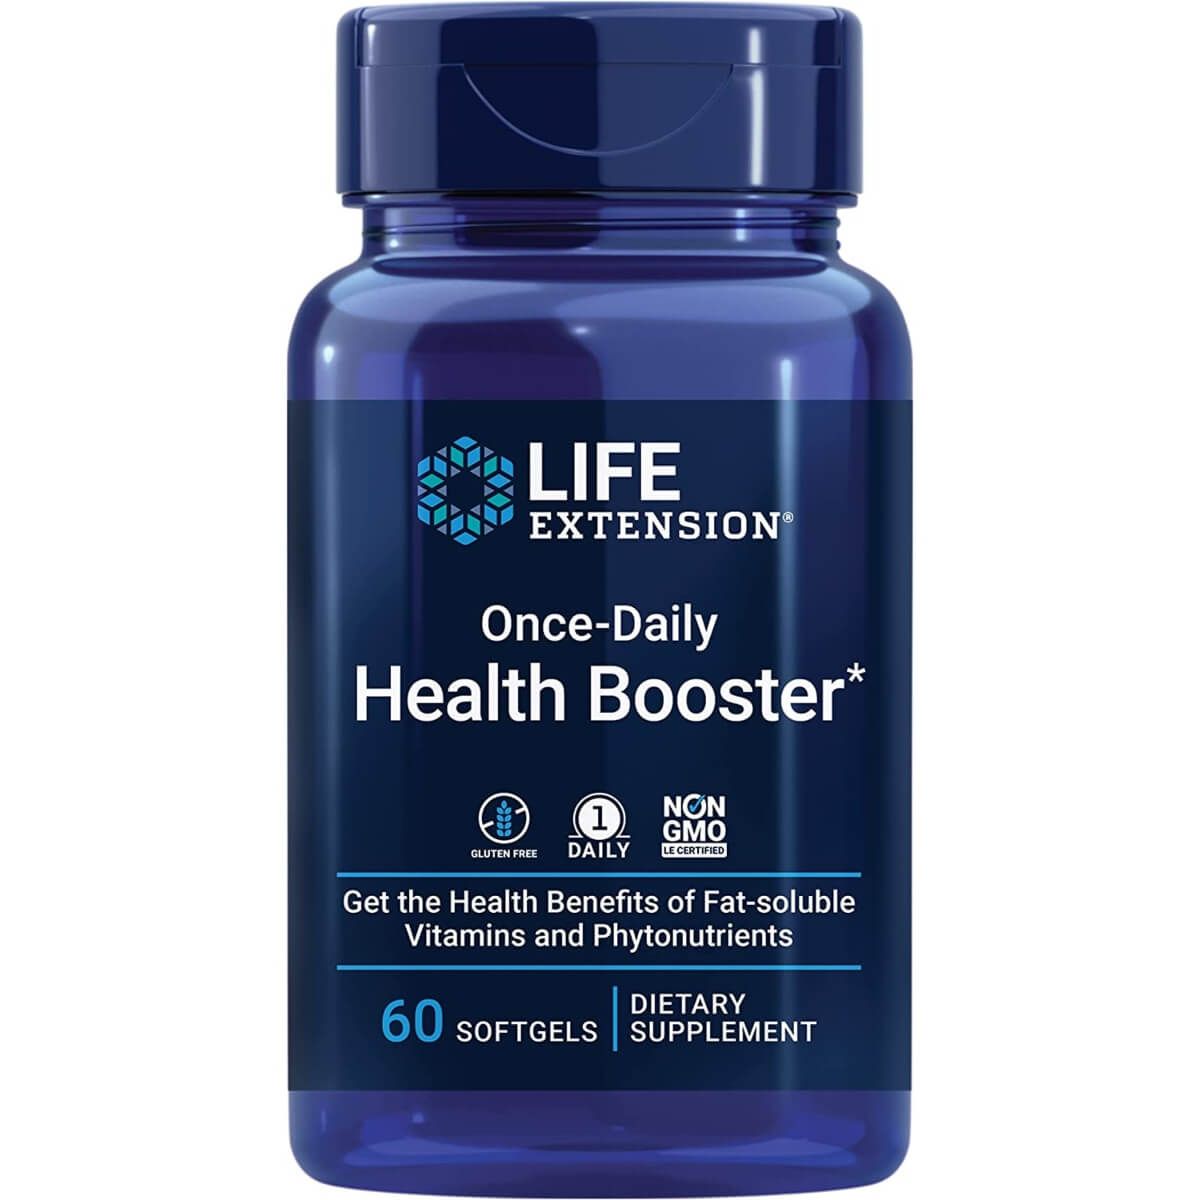 Photos - Vitamins & Minerals Life Extension Once-Daily Health Booster 60 Softgels VH-LEF-0480 